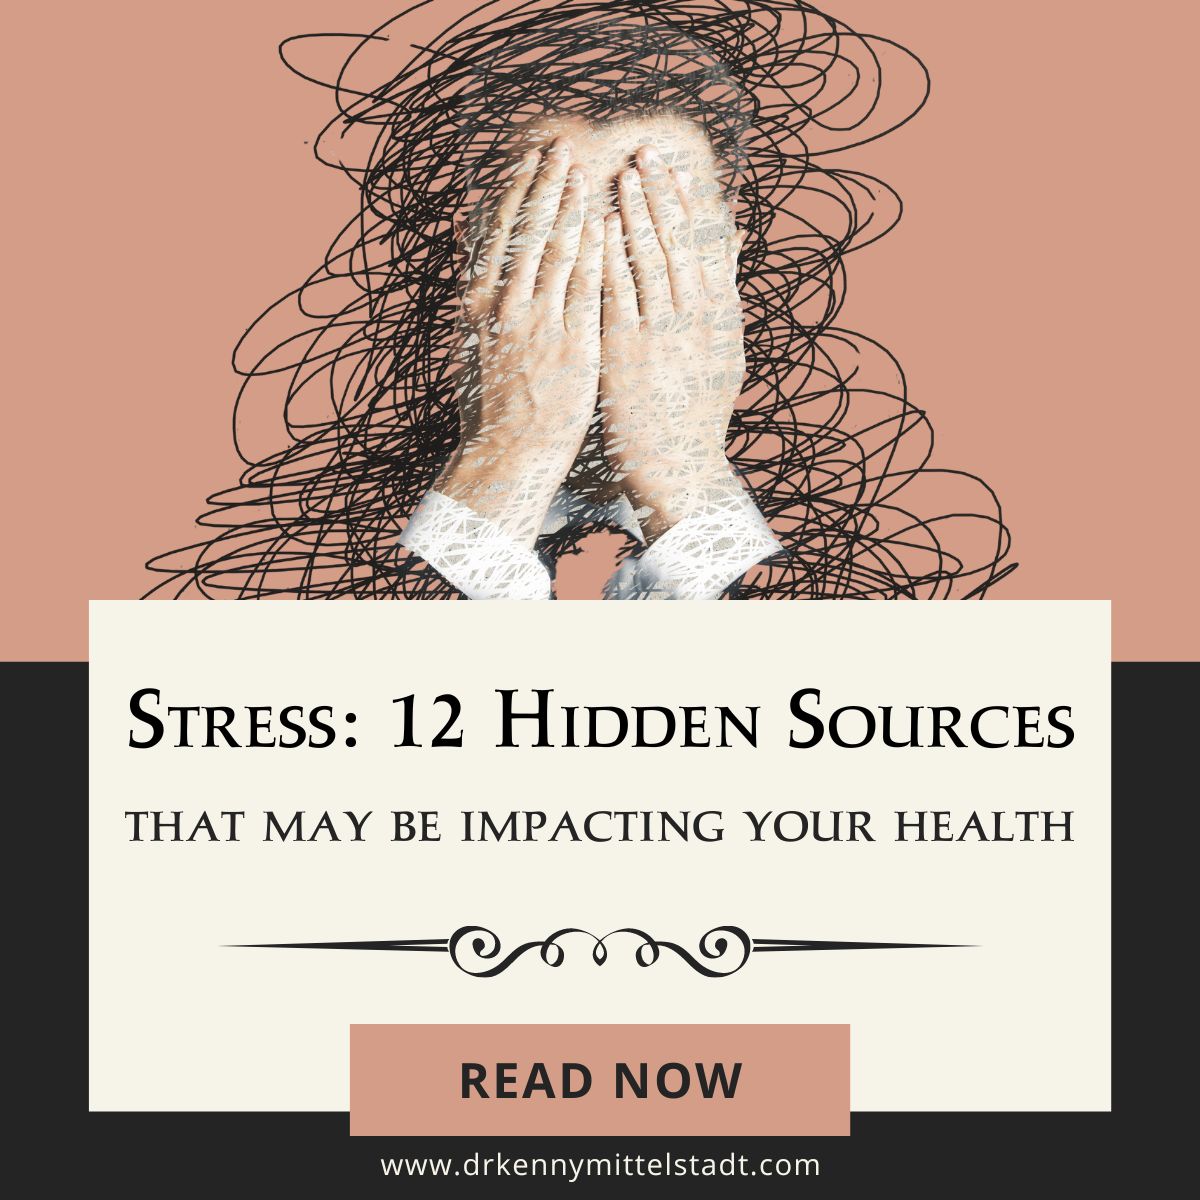 This image depicts an abstract image of a person experiencing stress with hands over their face and the title of the blog post - "Stress: 12 Hidden Sources that May Be Impacting Your Health."